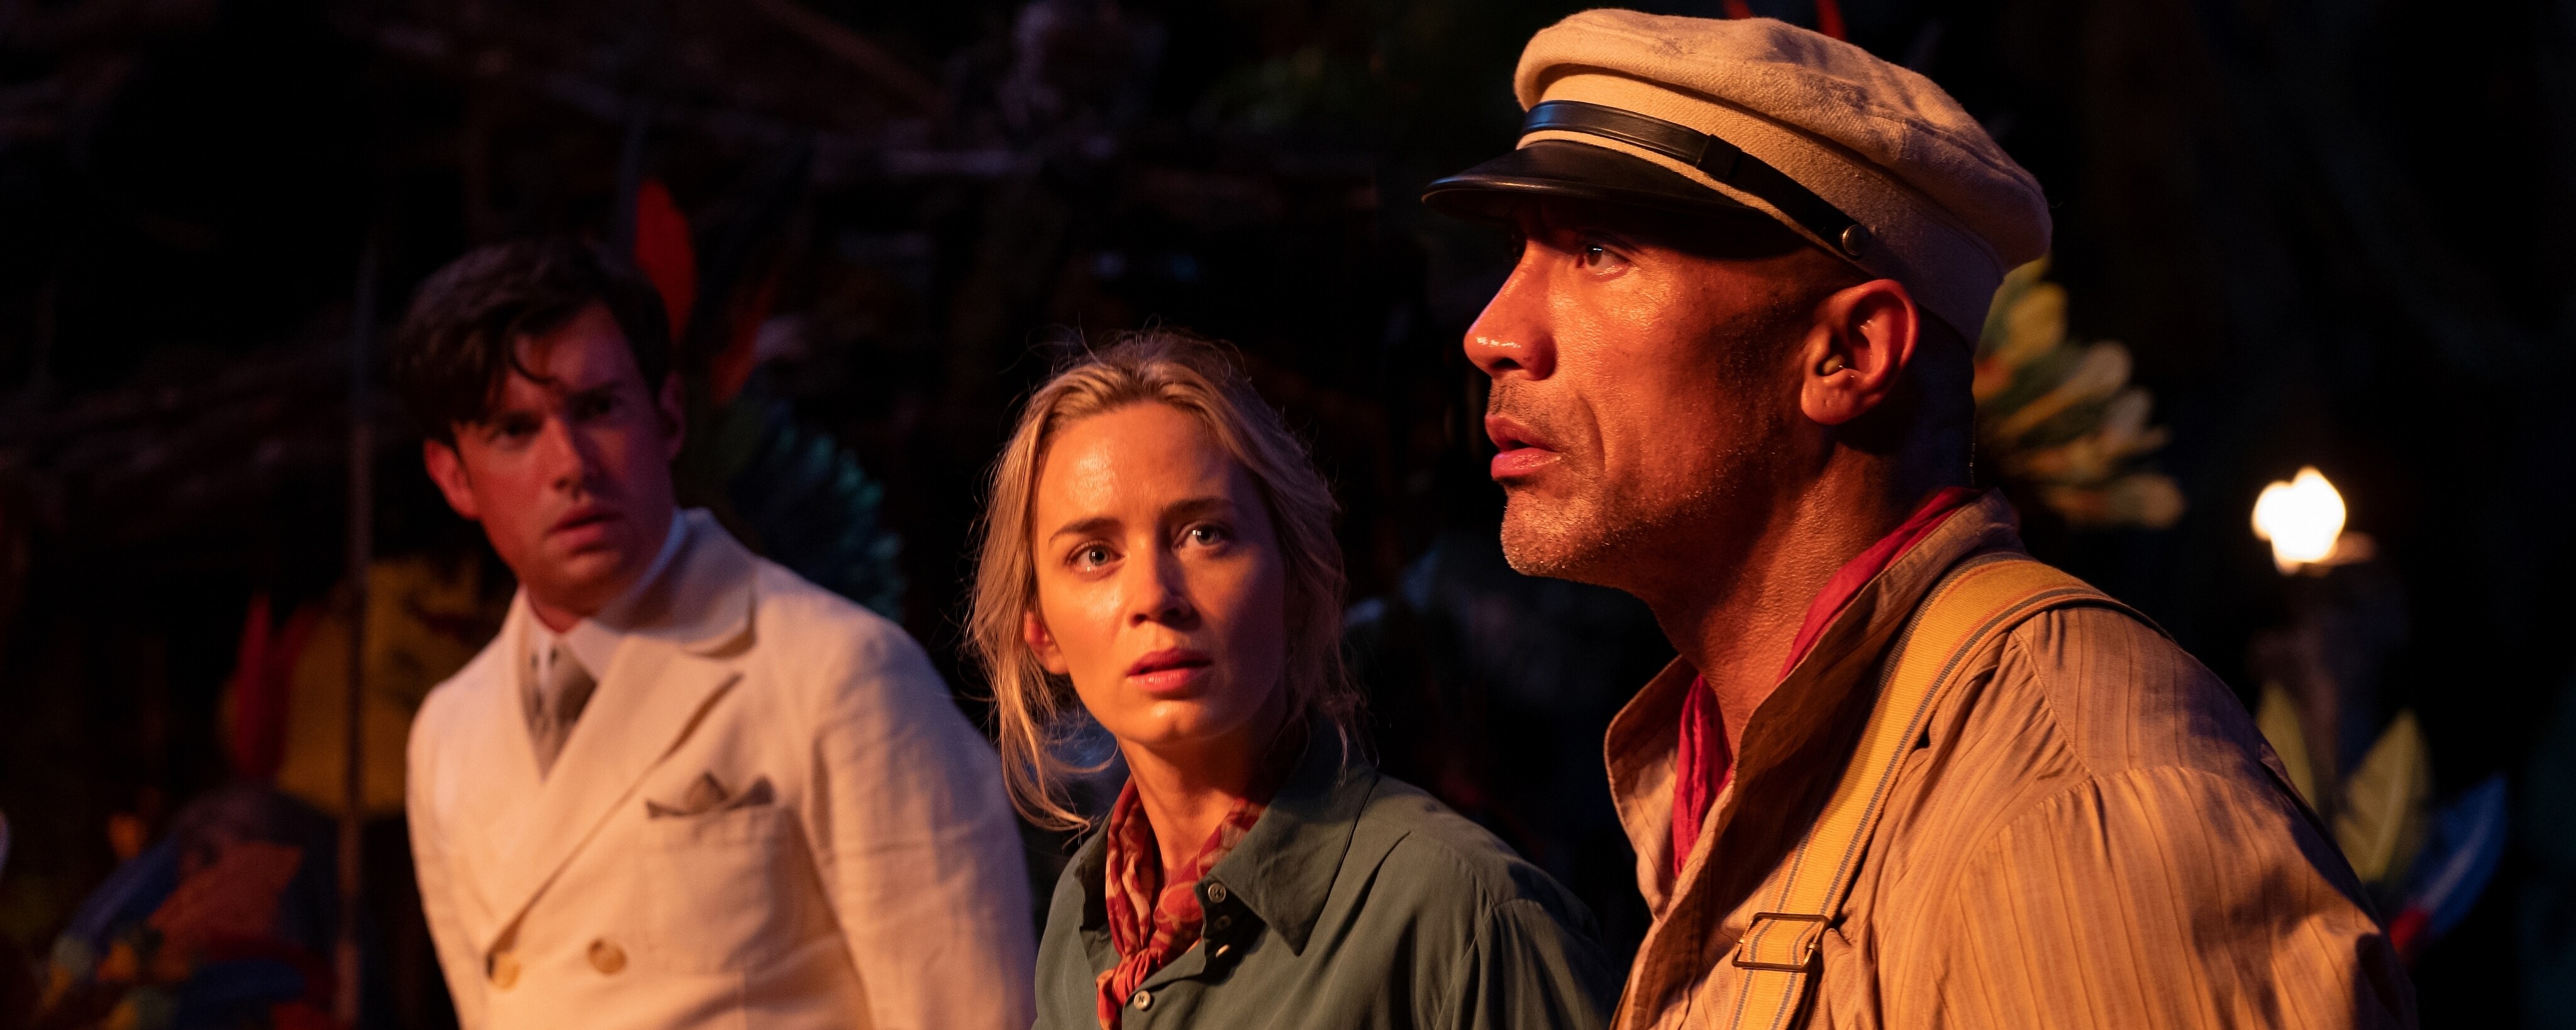 Jack Whitehall, Emily Blunt, and Dwayne Johnson in The Jungle Cruise